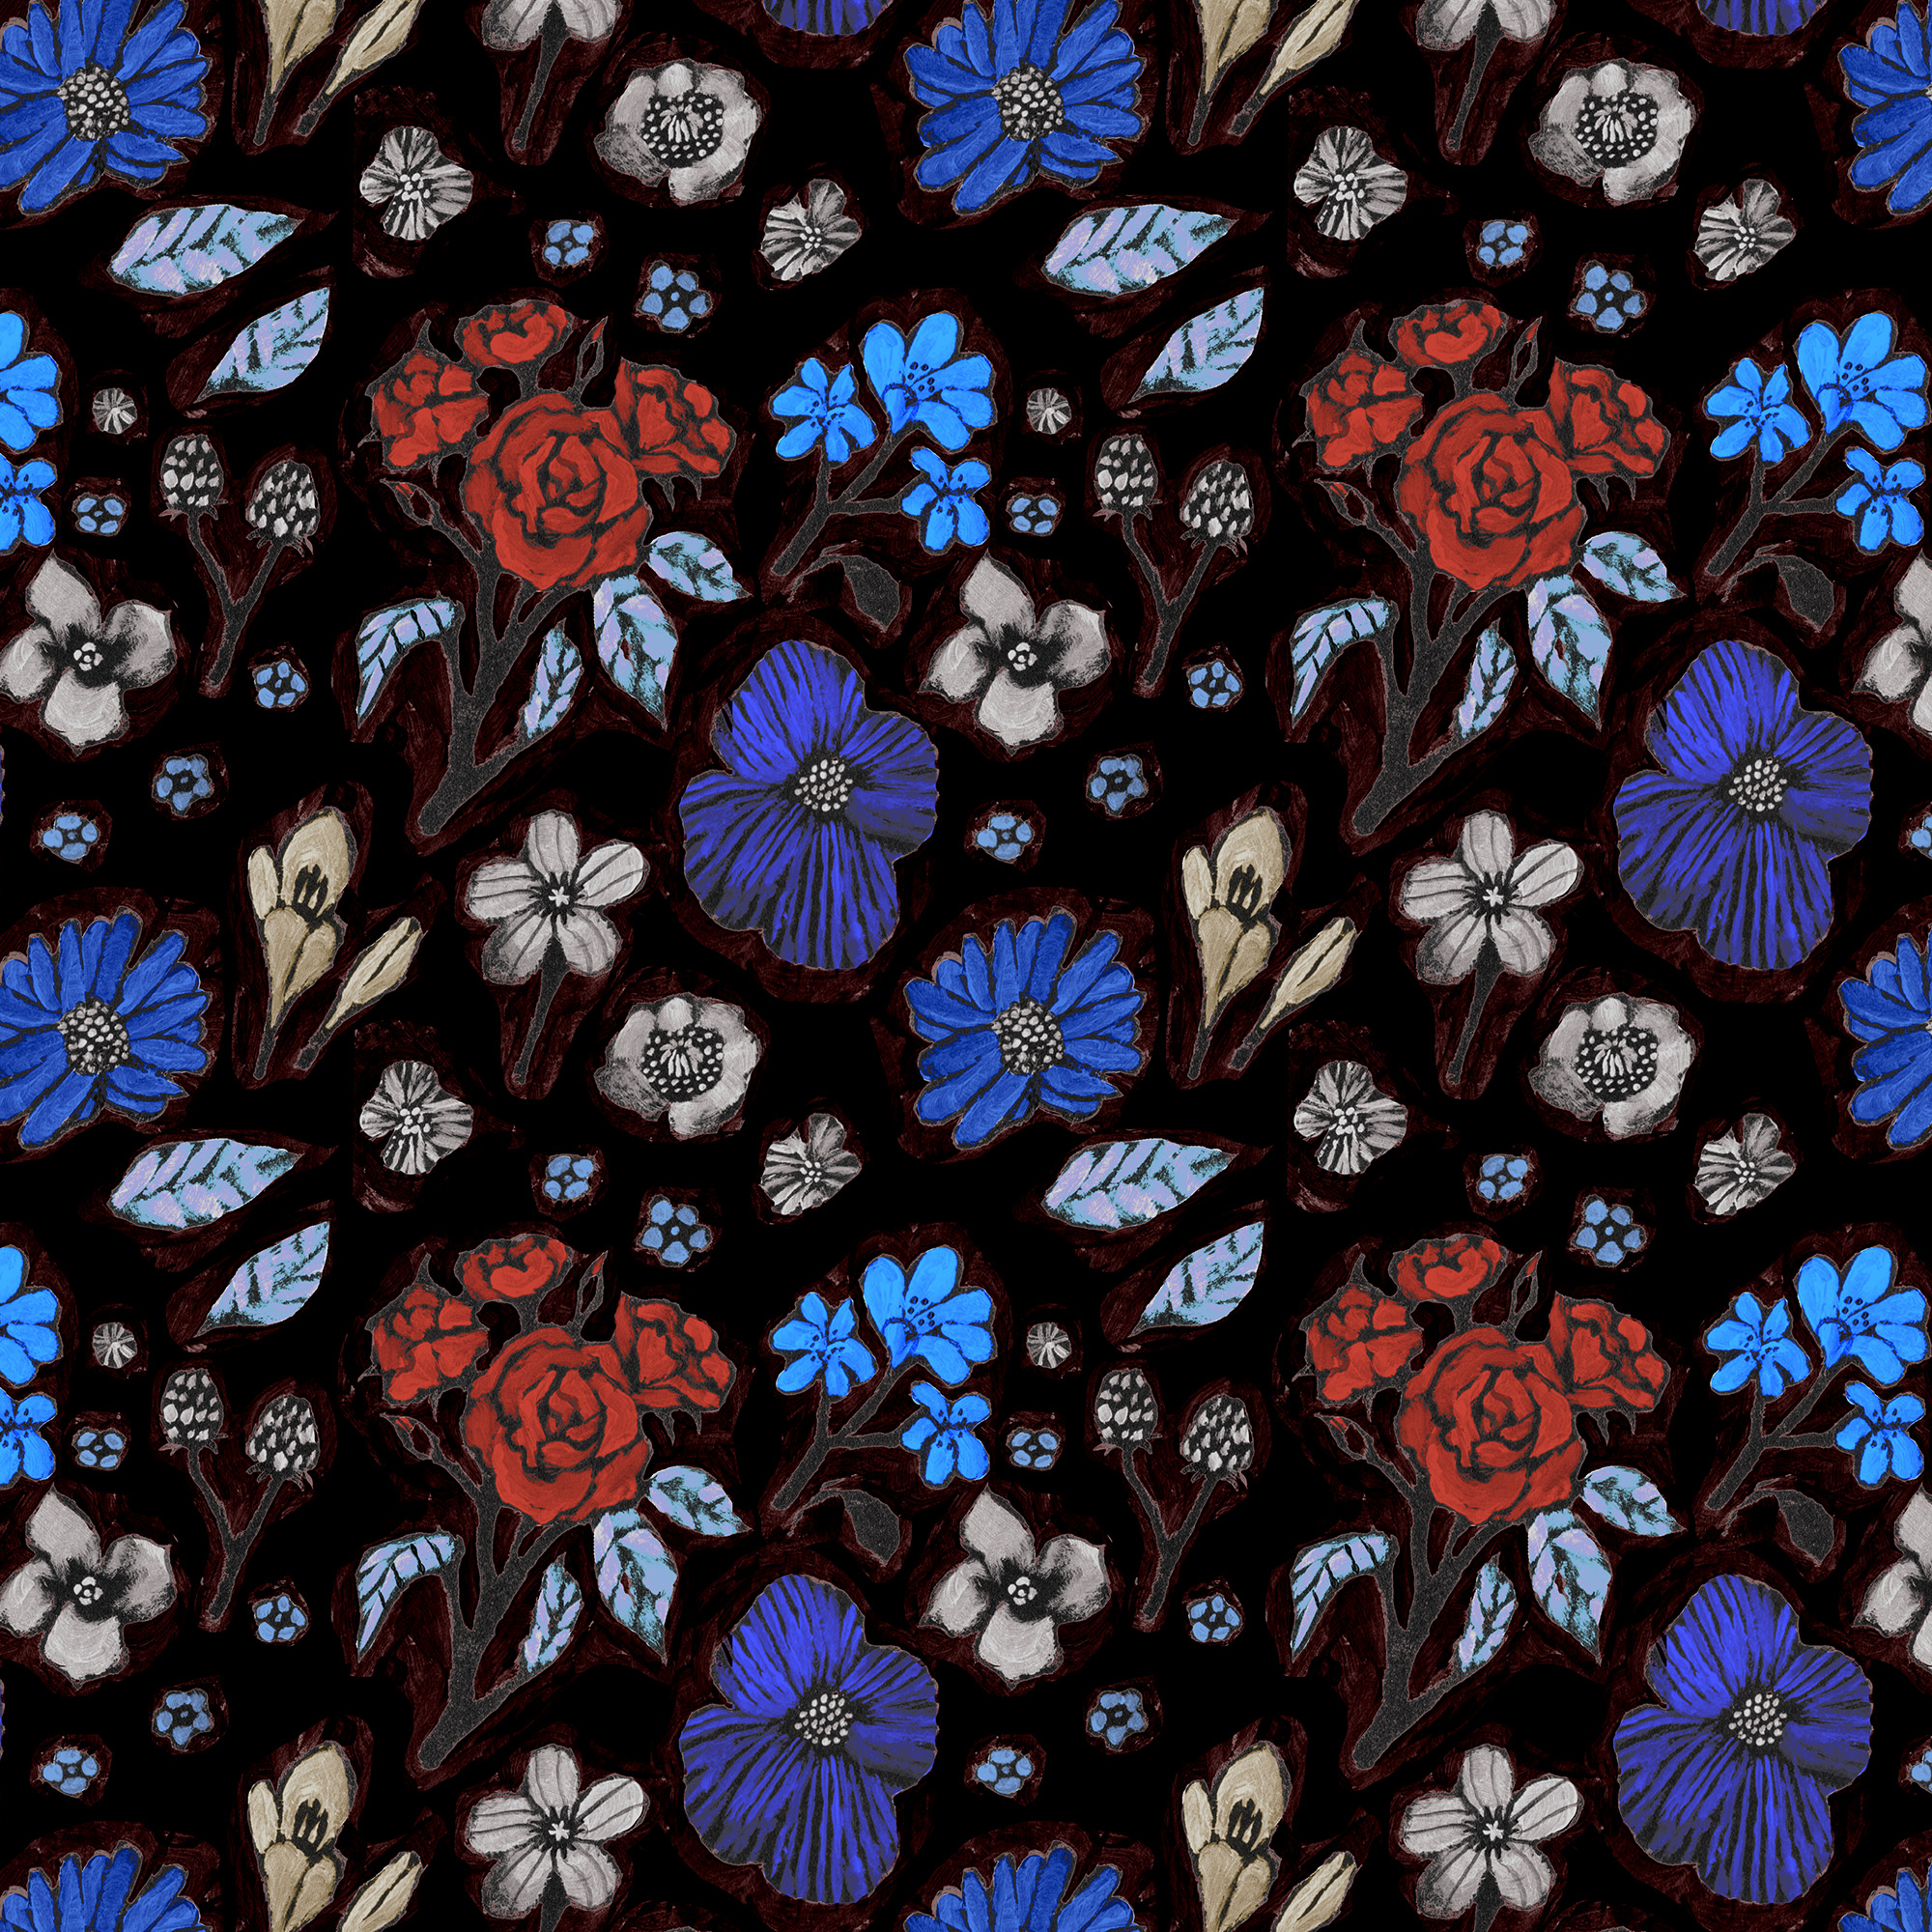 Hand-painted repeating flower pattern